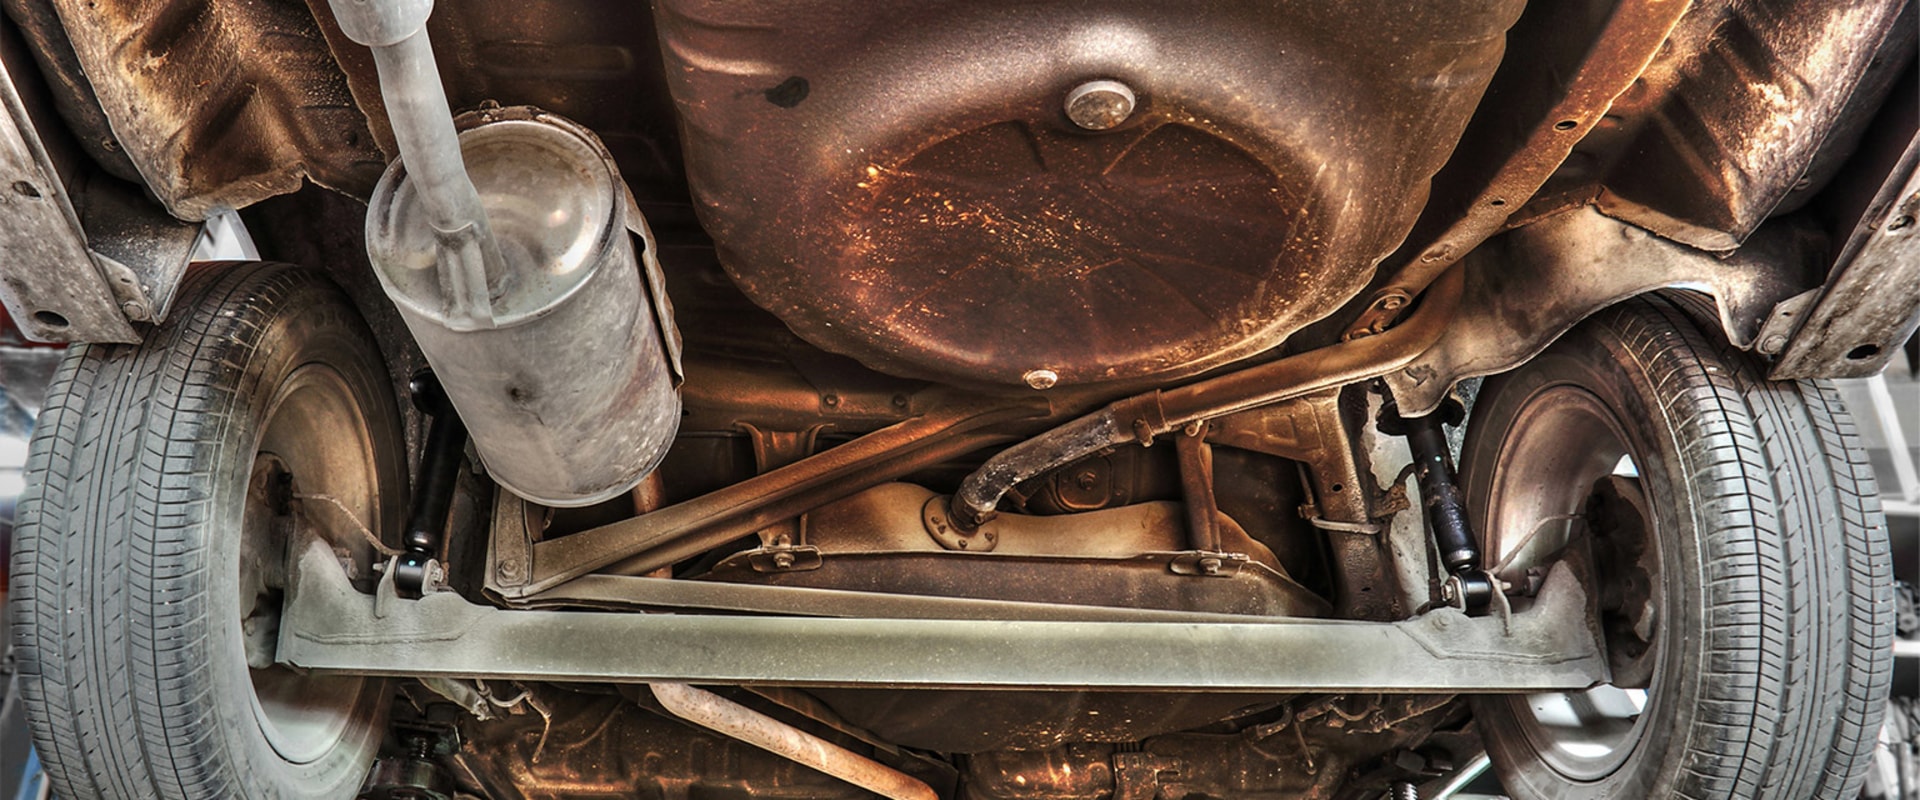 How do you know if your car has rust damage?